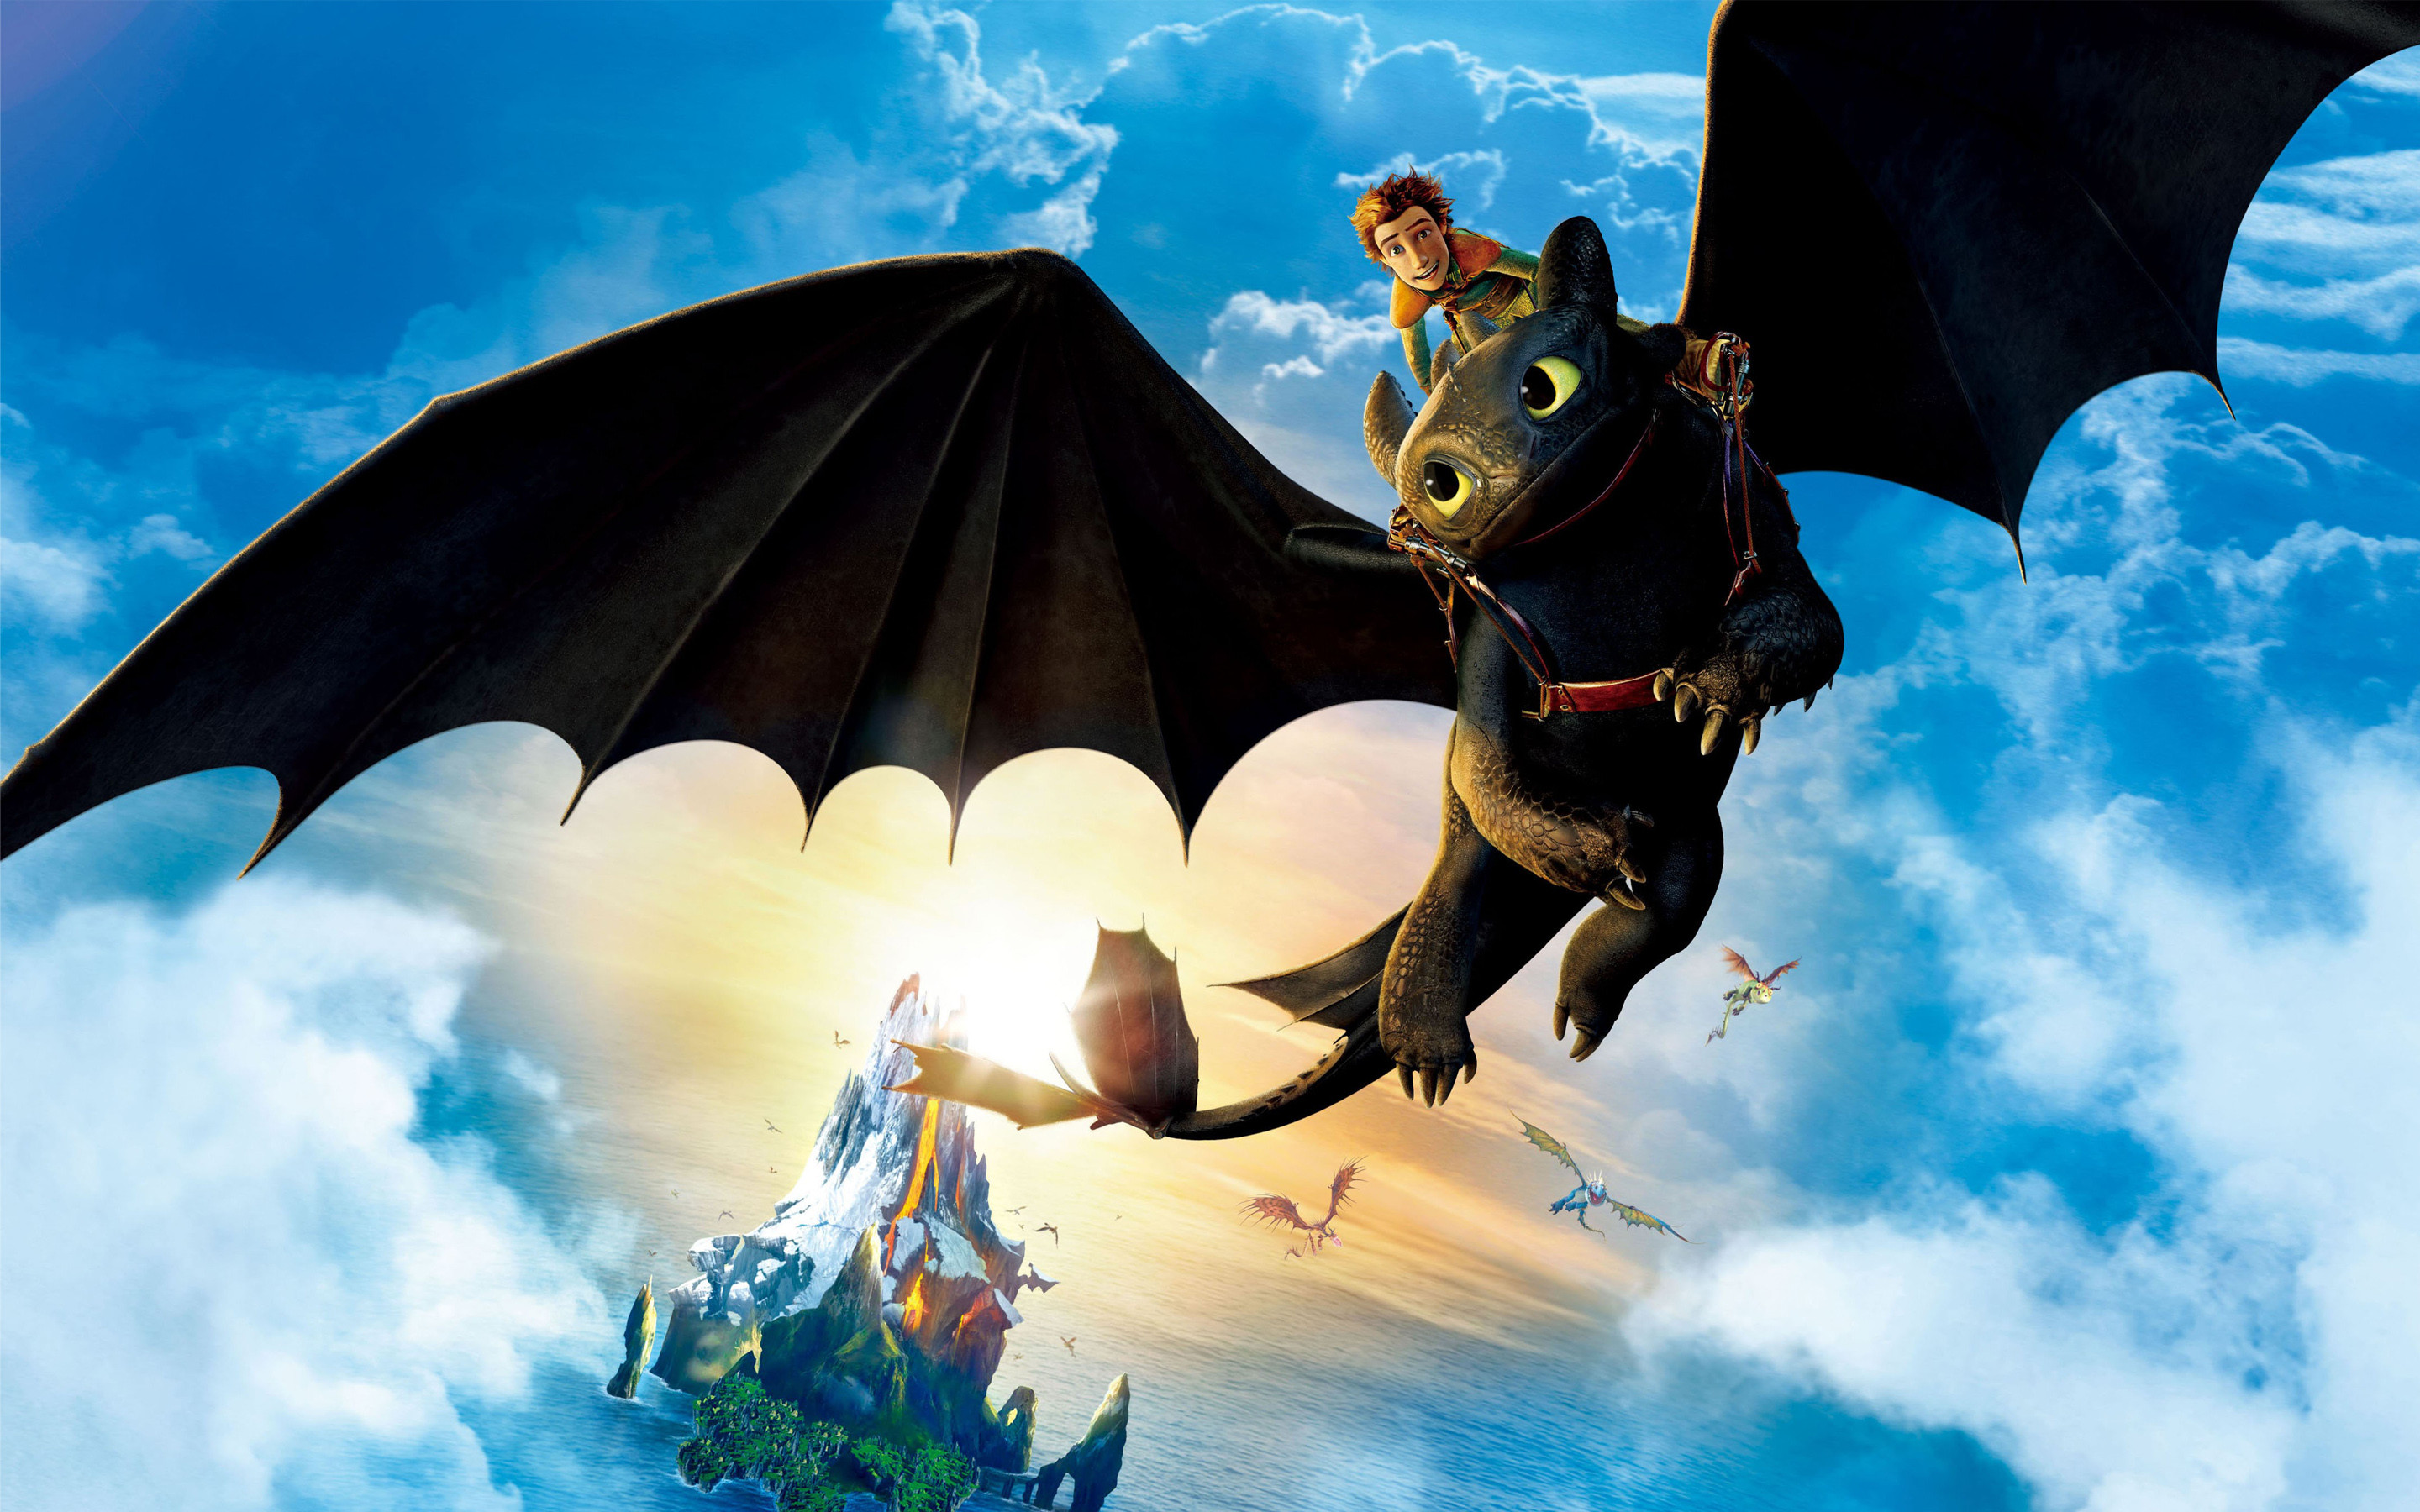 Hiccup and Toothless Exclusive HD Wallpapers #6787